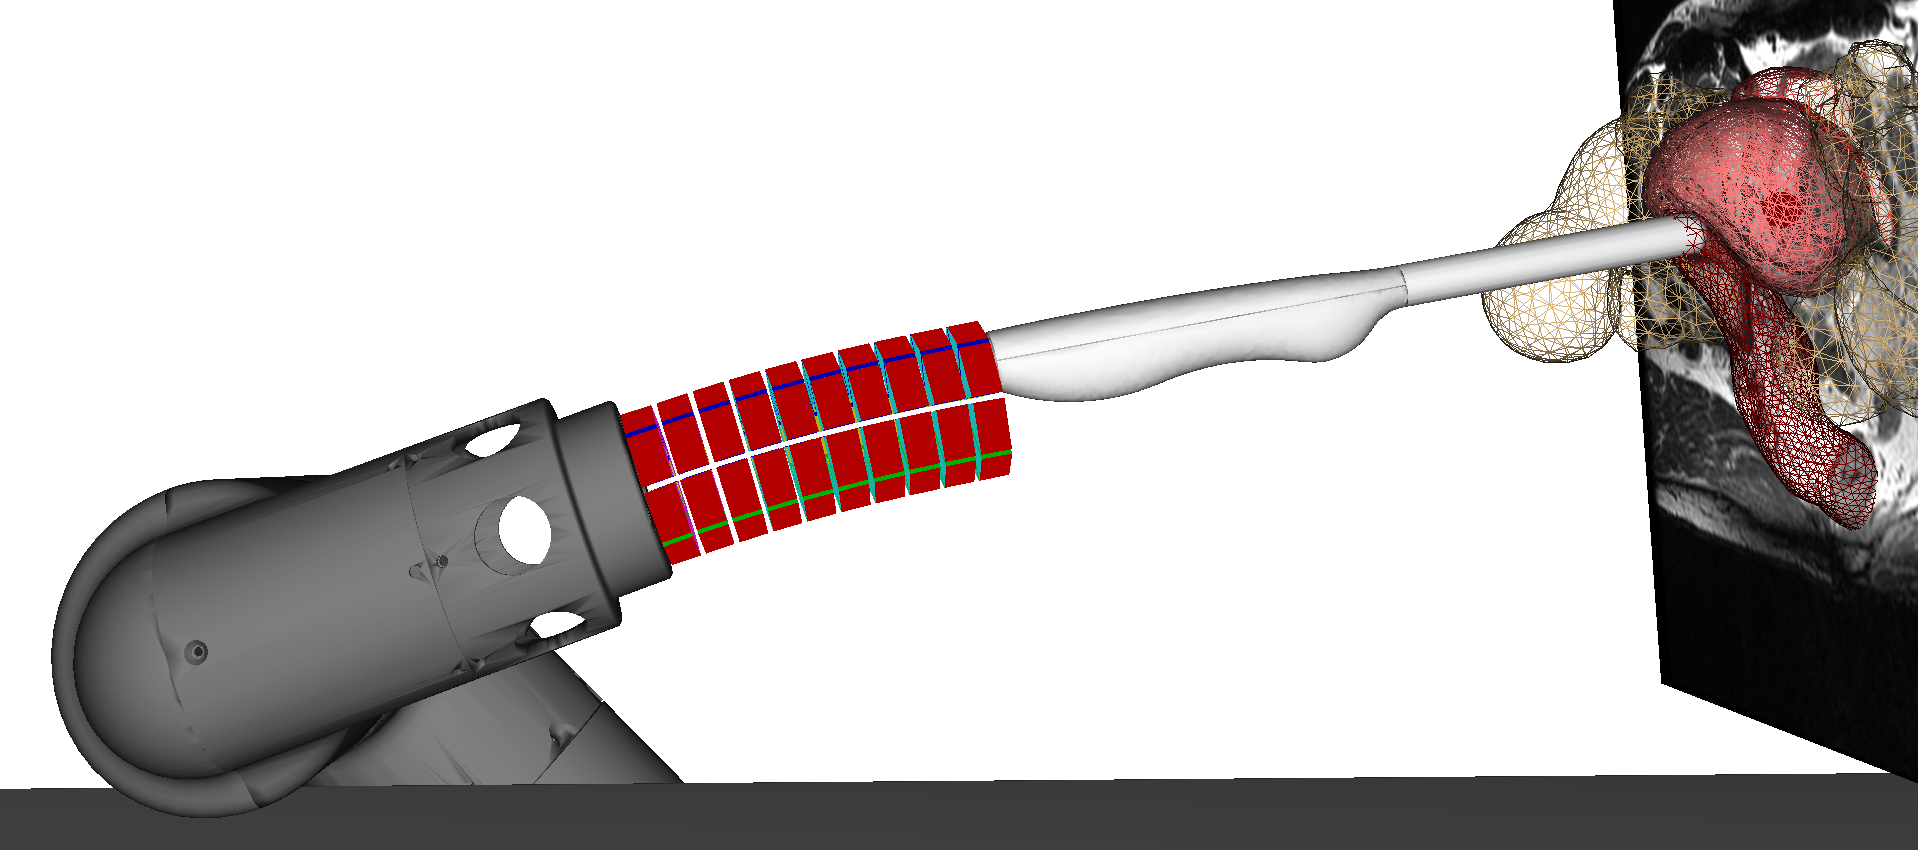 Image showing the simulation of on hybrid soft and rigid arm for prostate biopsy.